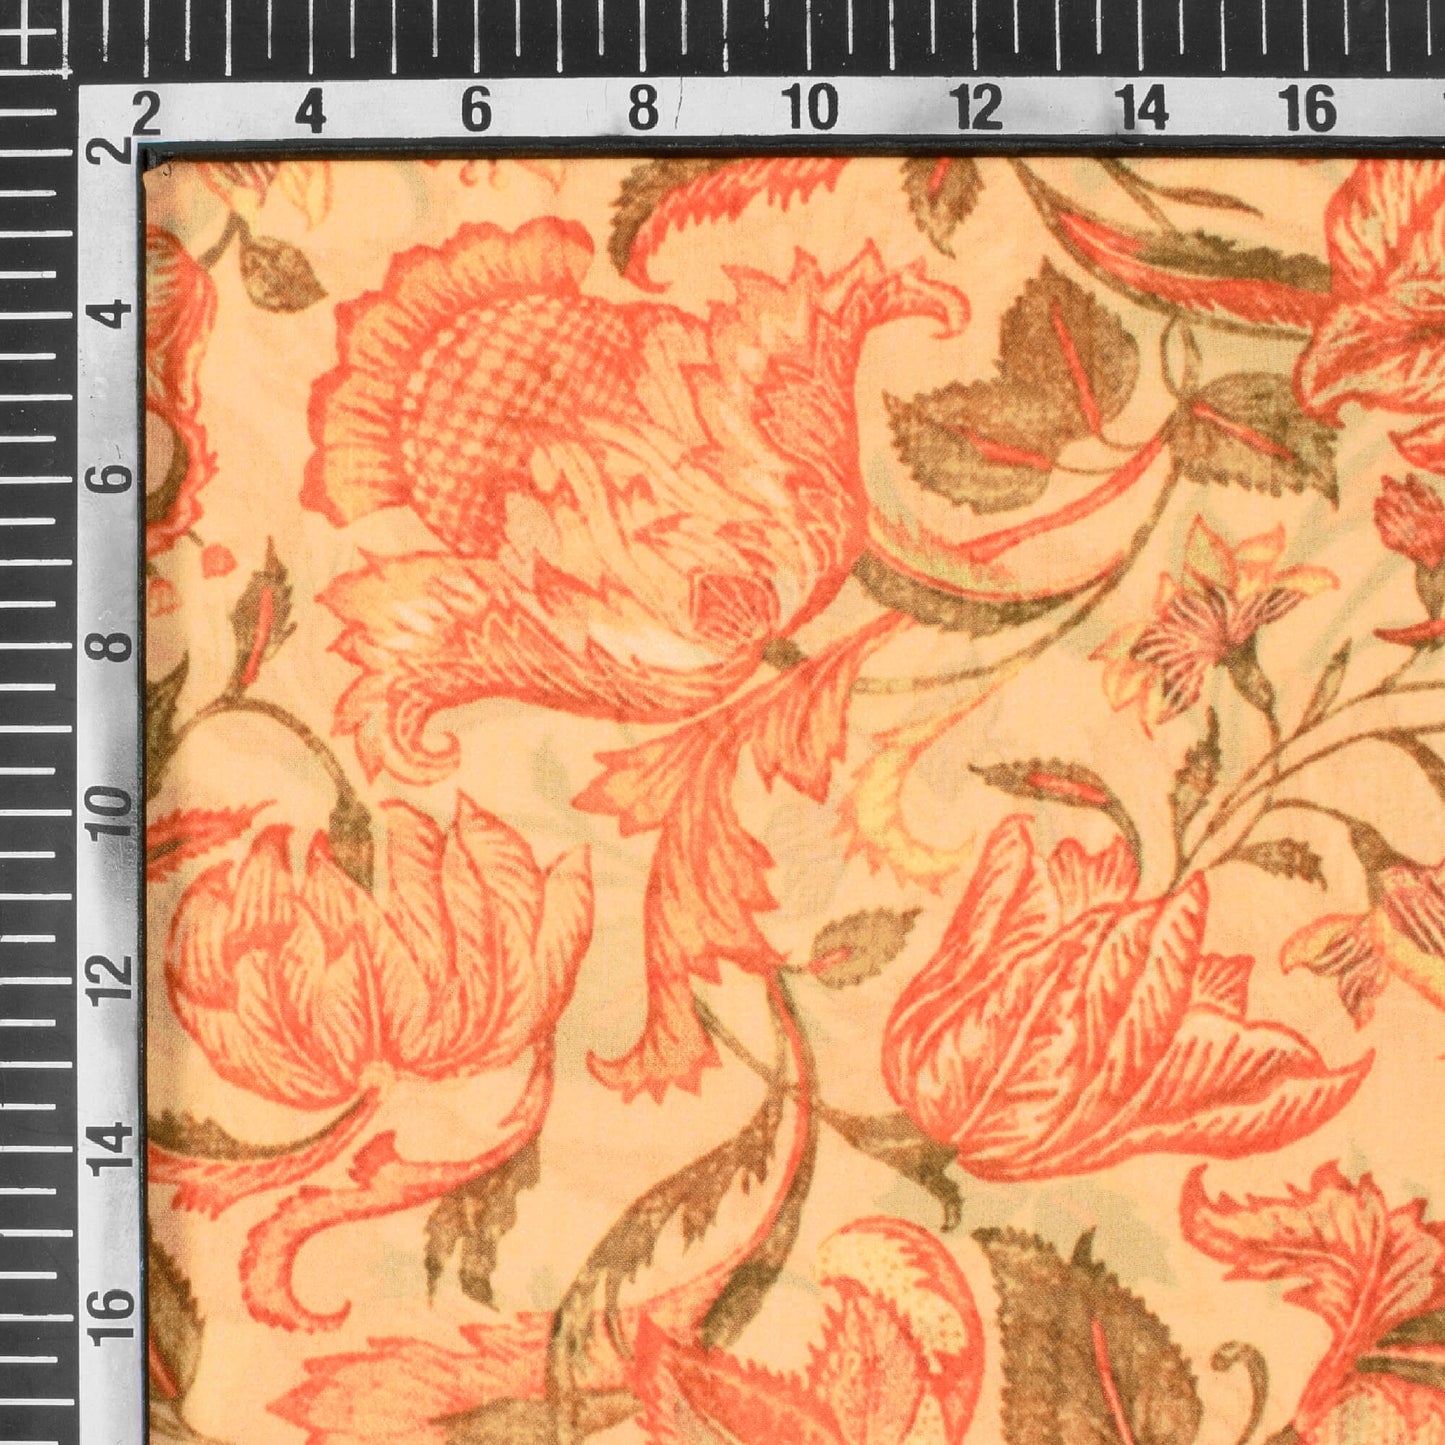 Sathvika's Choice Melow Yellow And Orange Floral Pattern Digital Print Georgette Fabric